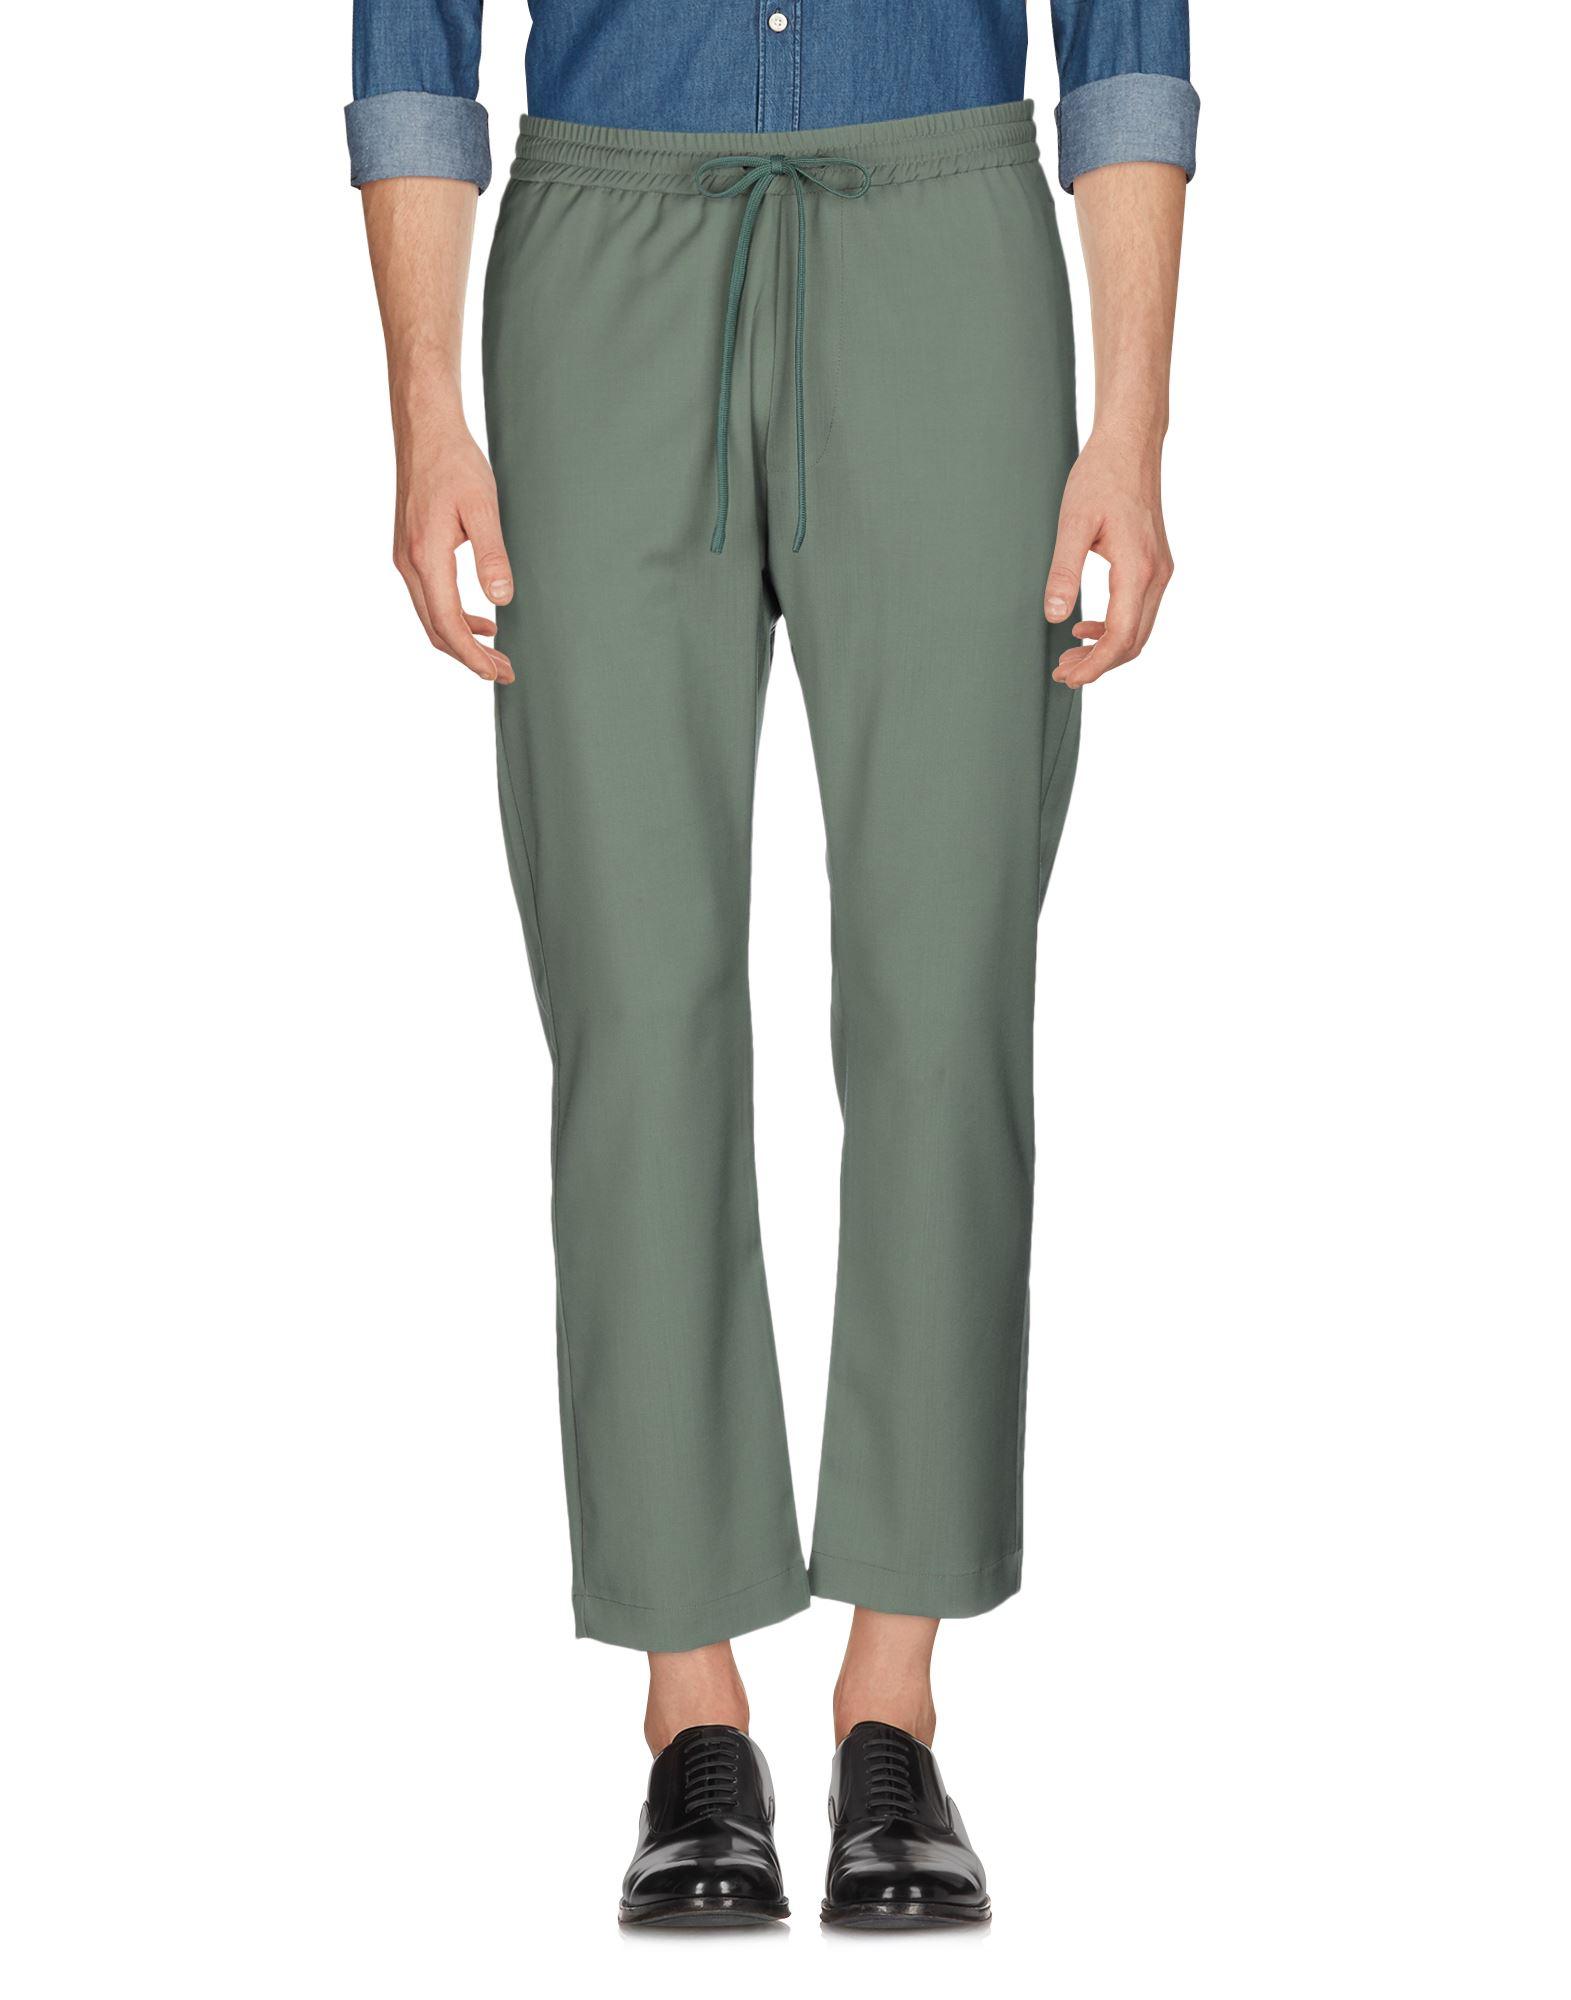 Barena Casual Pants in Military Green (Green) for Men - Lyst